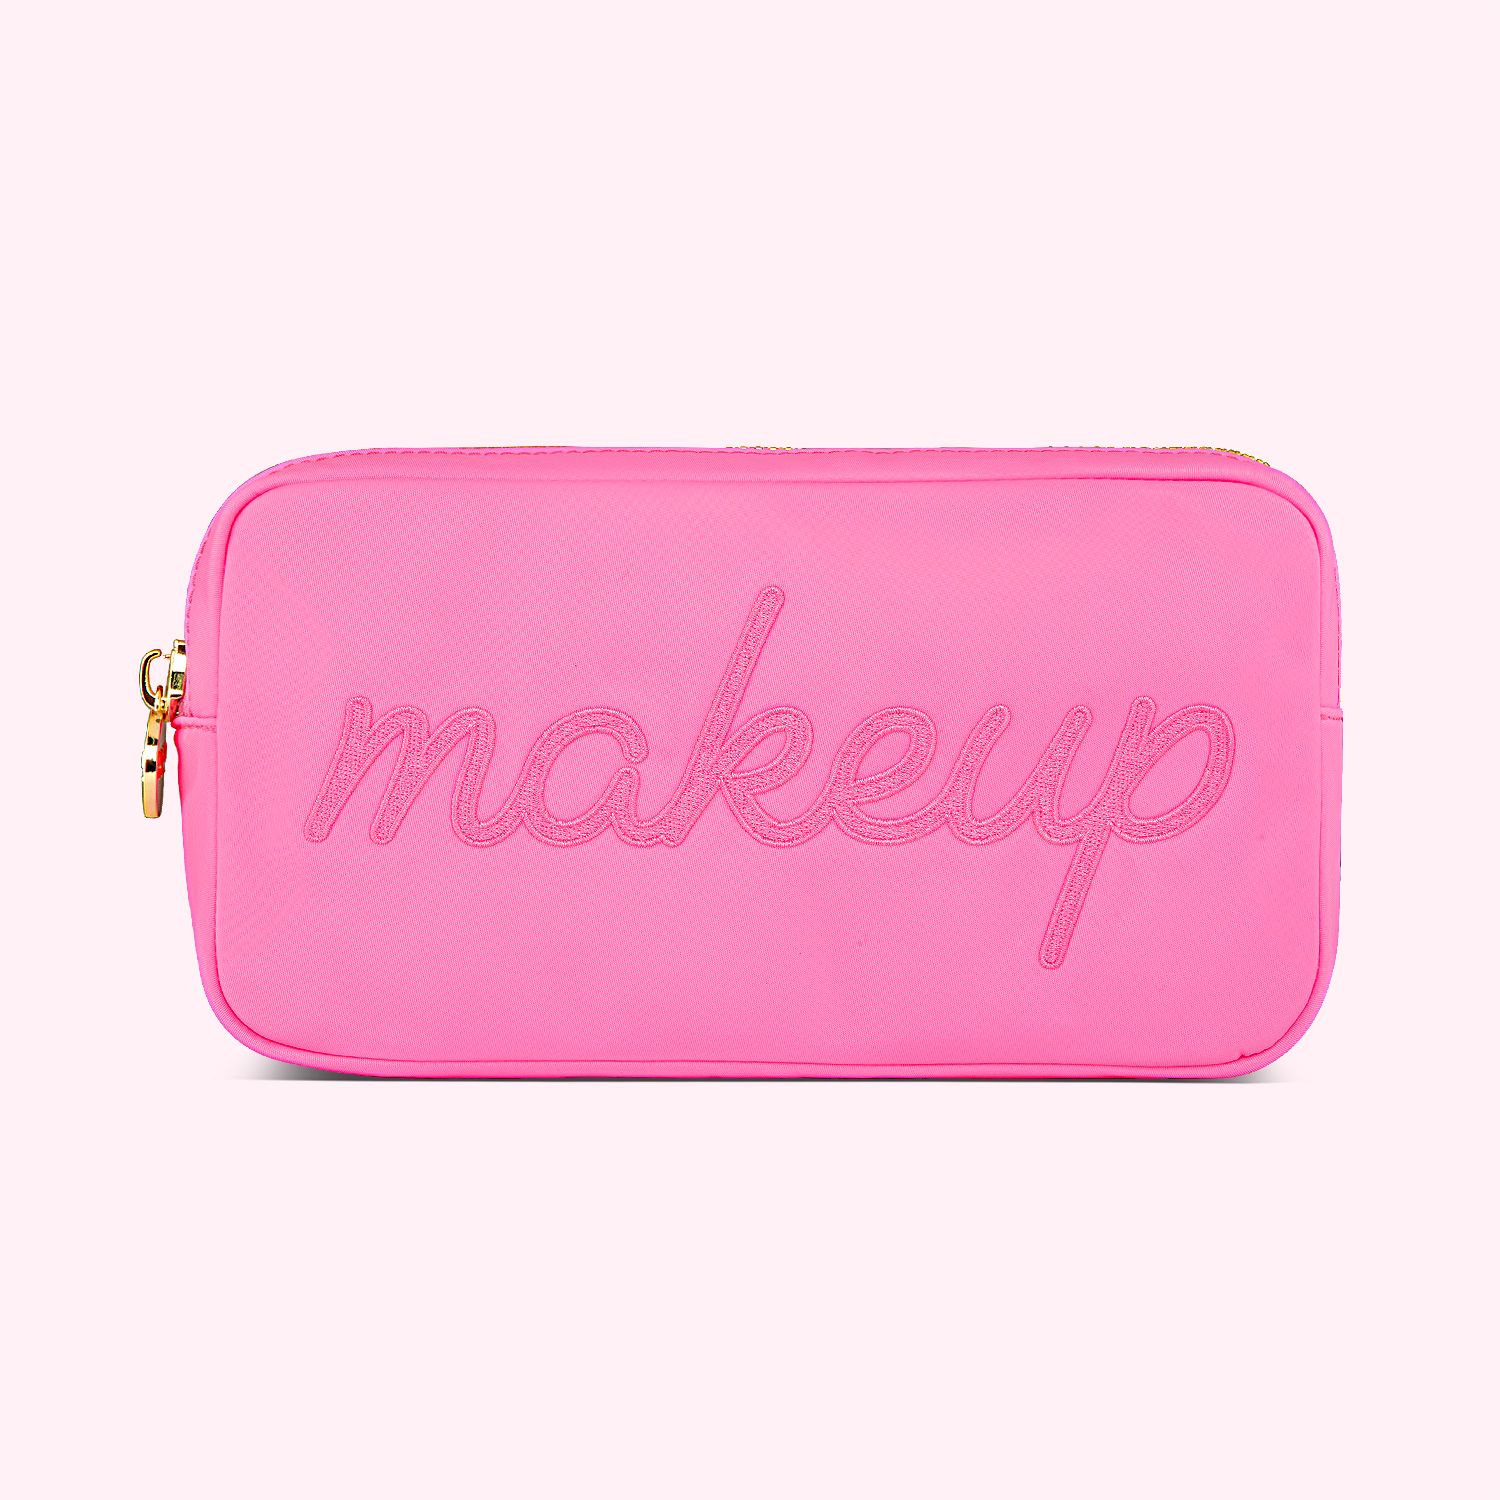 "Makeup" Embroidered Small Pouch | Stoney Clover Lane | Stoney Clover Lane